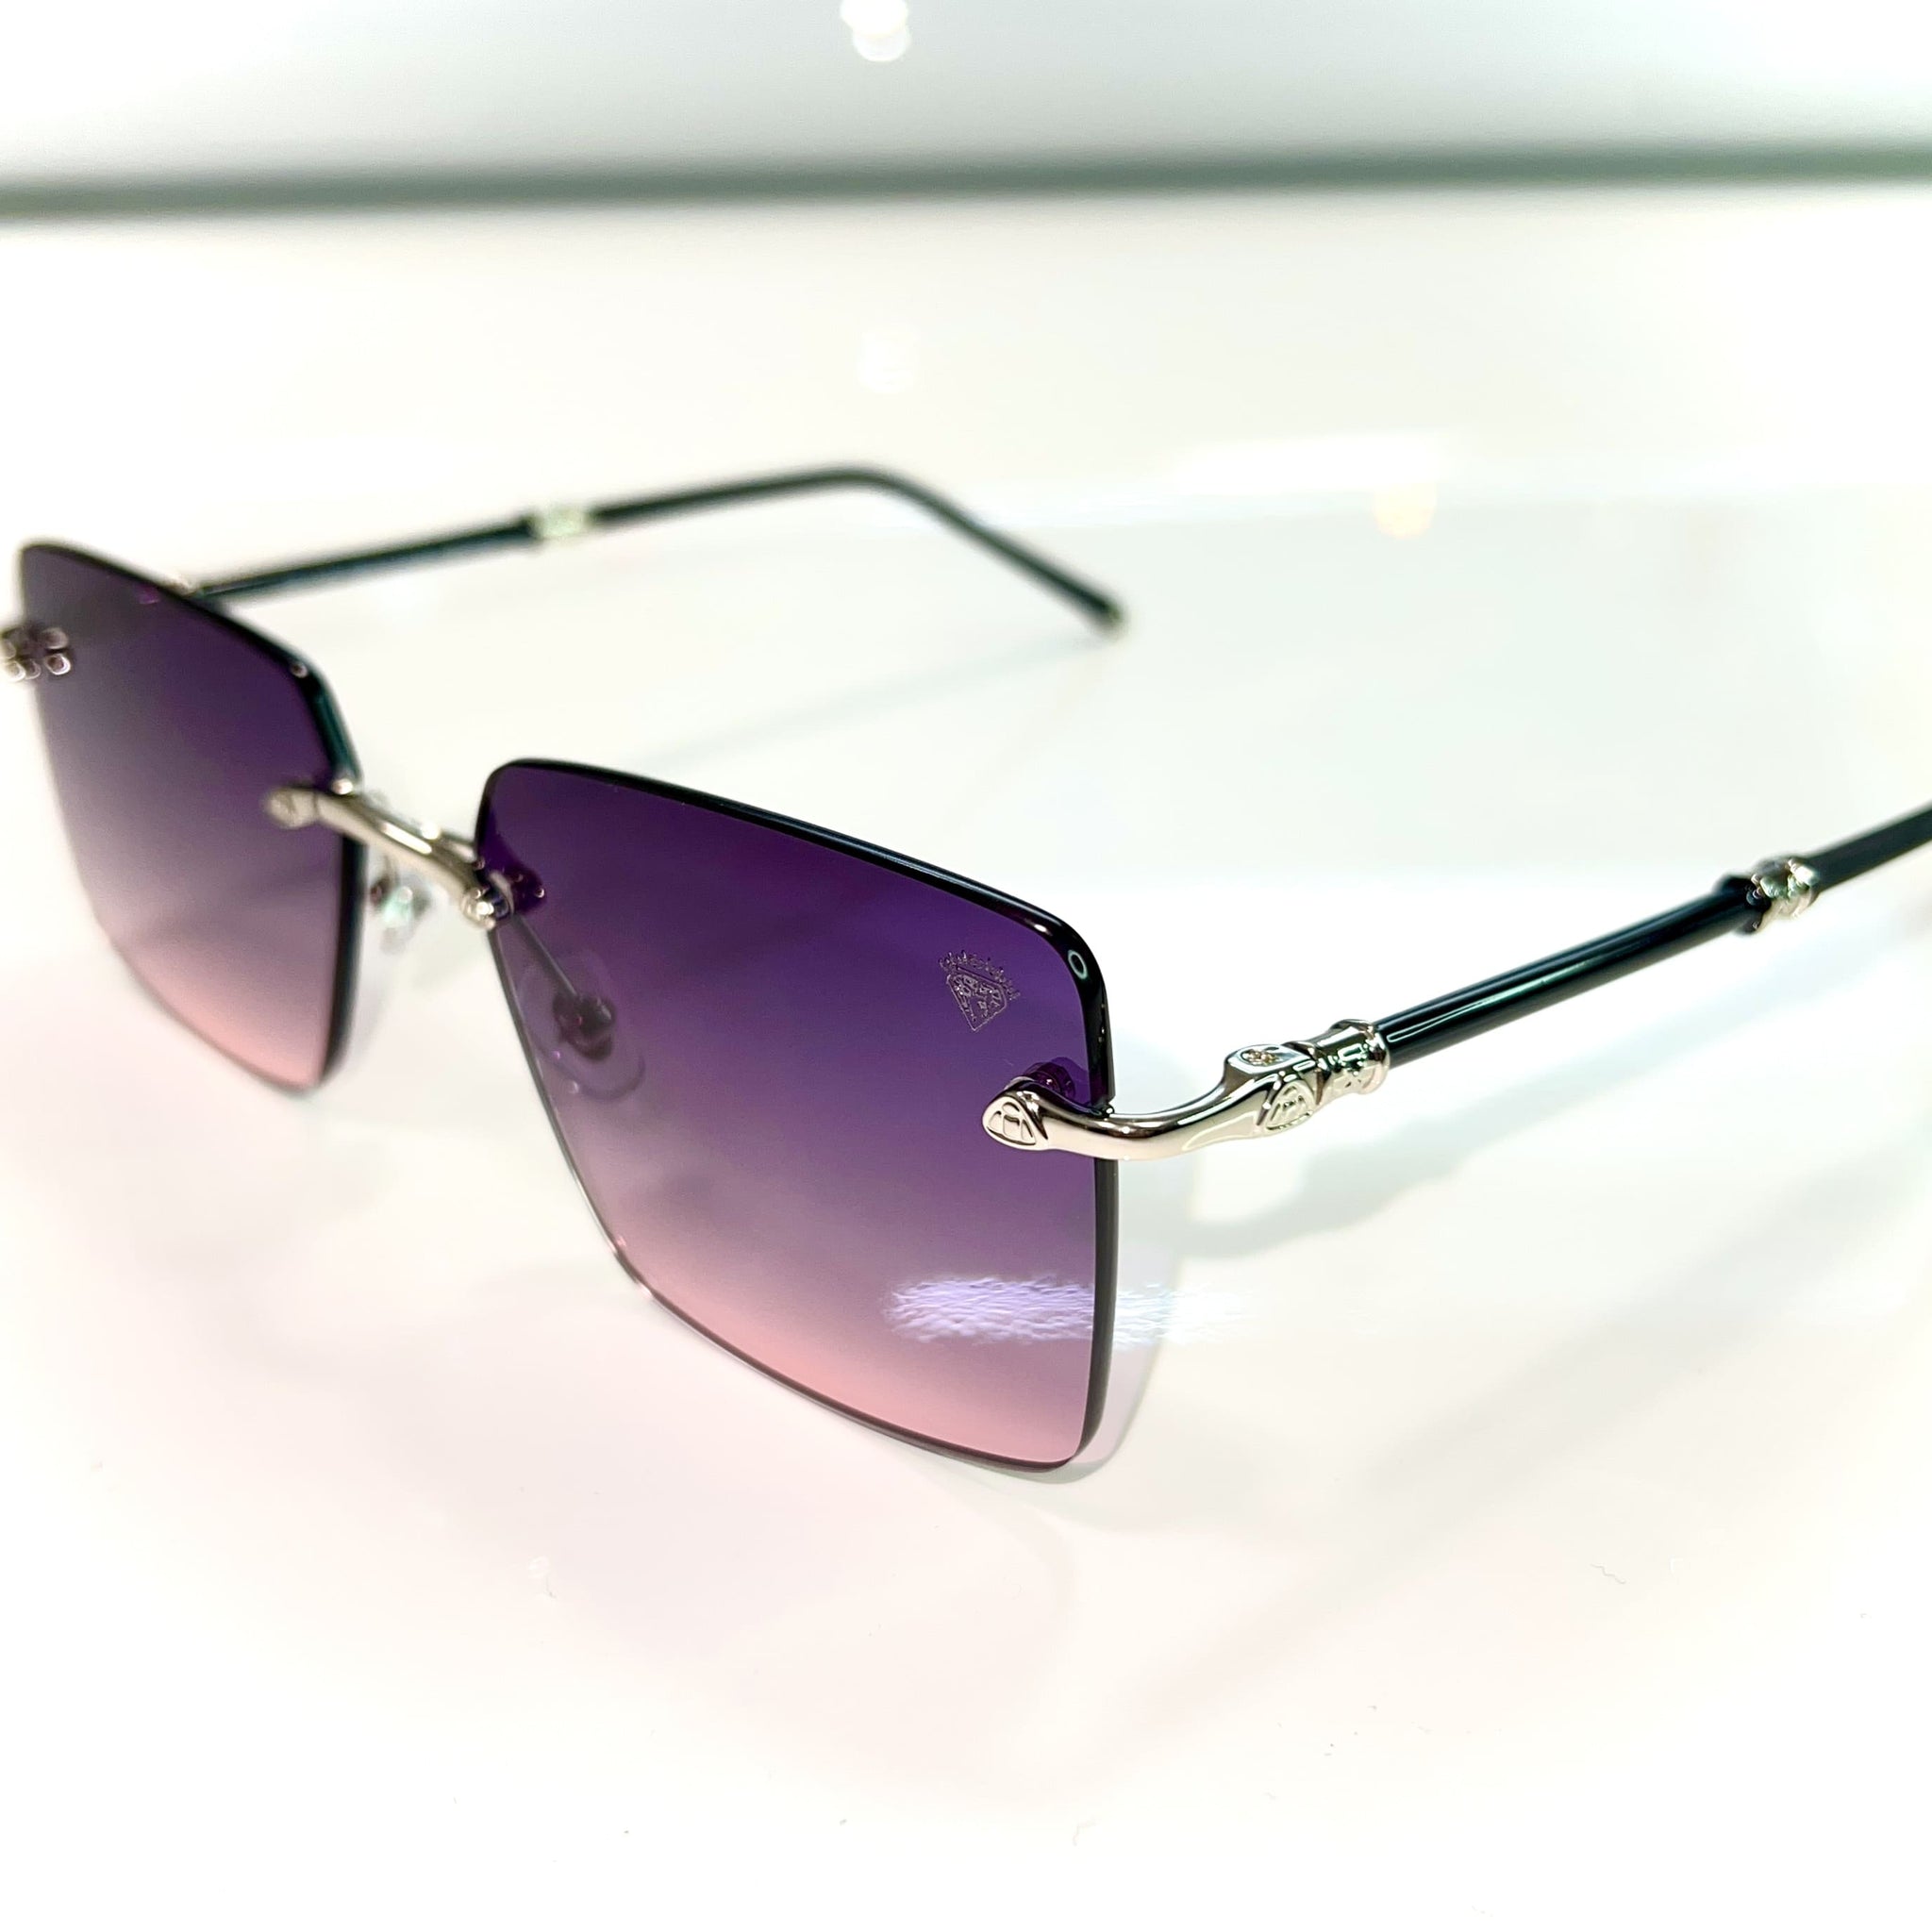 Eduardo Glasses - Silver 925 plated + Silicon side - Purple/Pink Shade - Sehgal Glasses